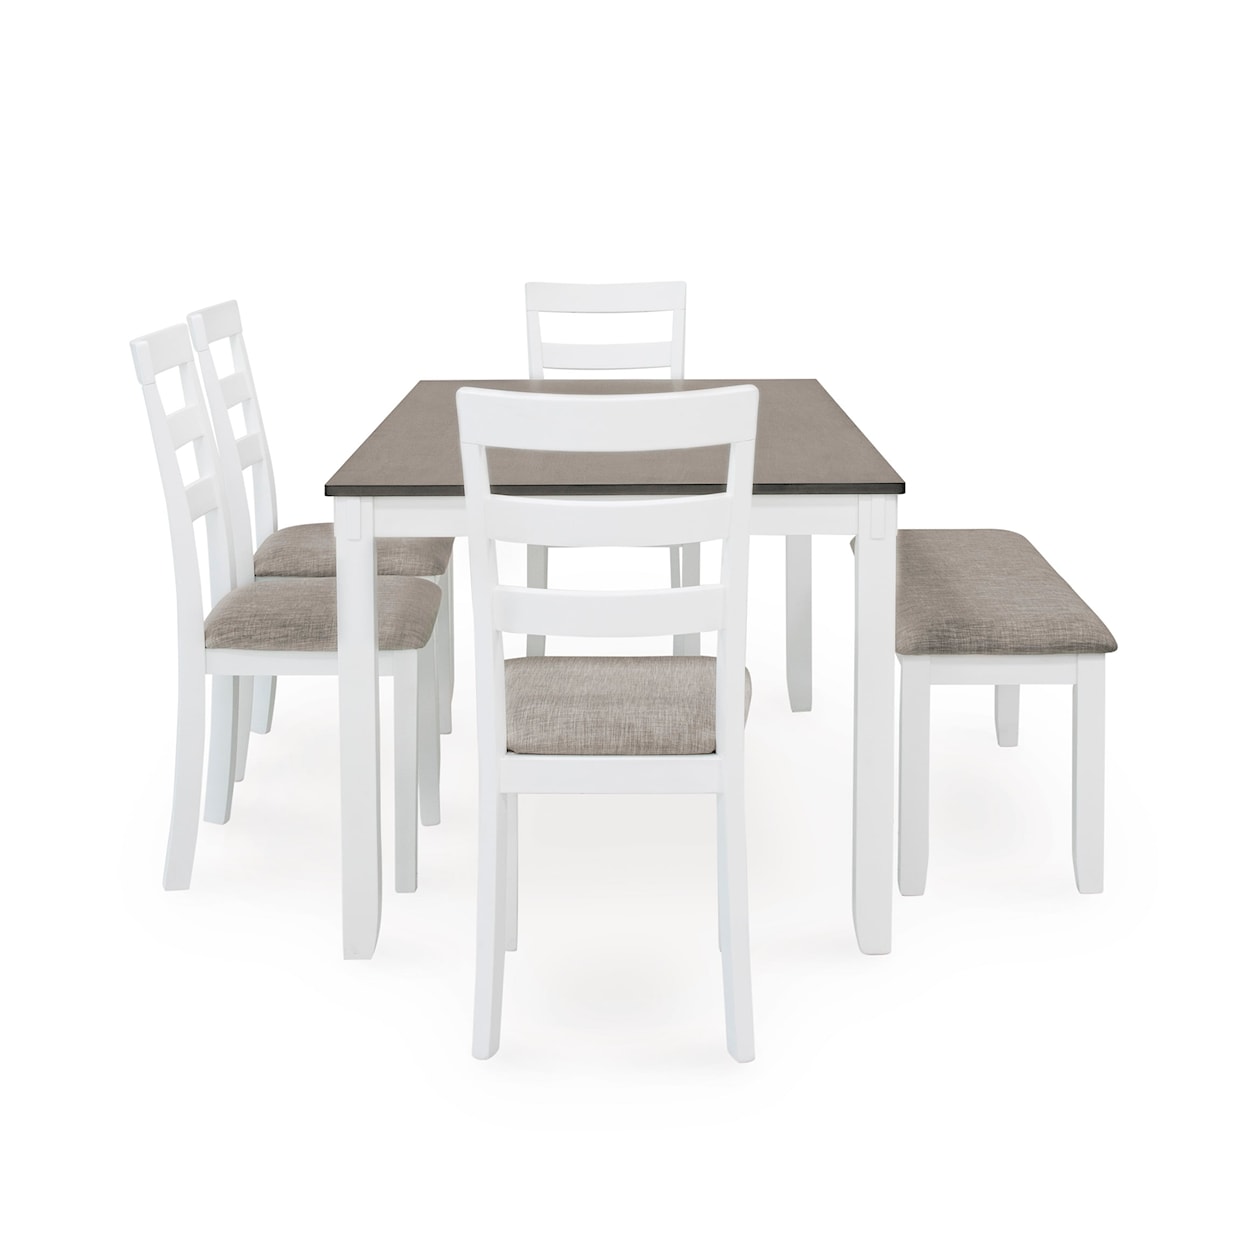 Signature Stonehollow Dining Table and Chairs with Bench Set